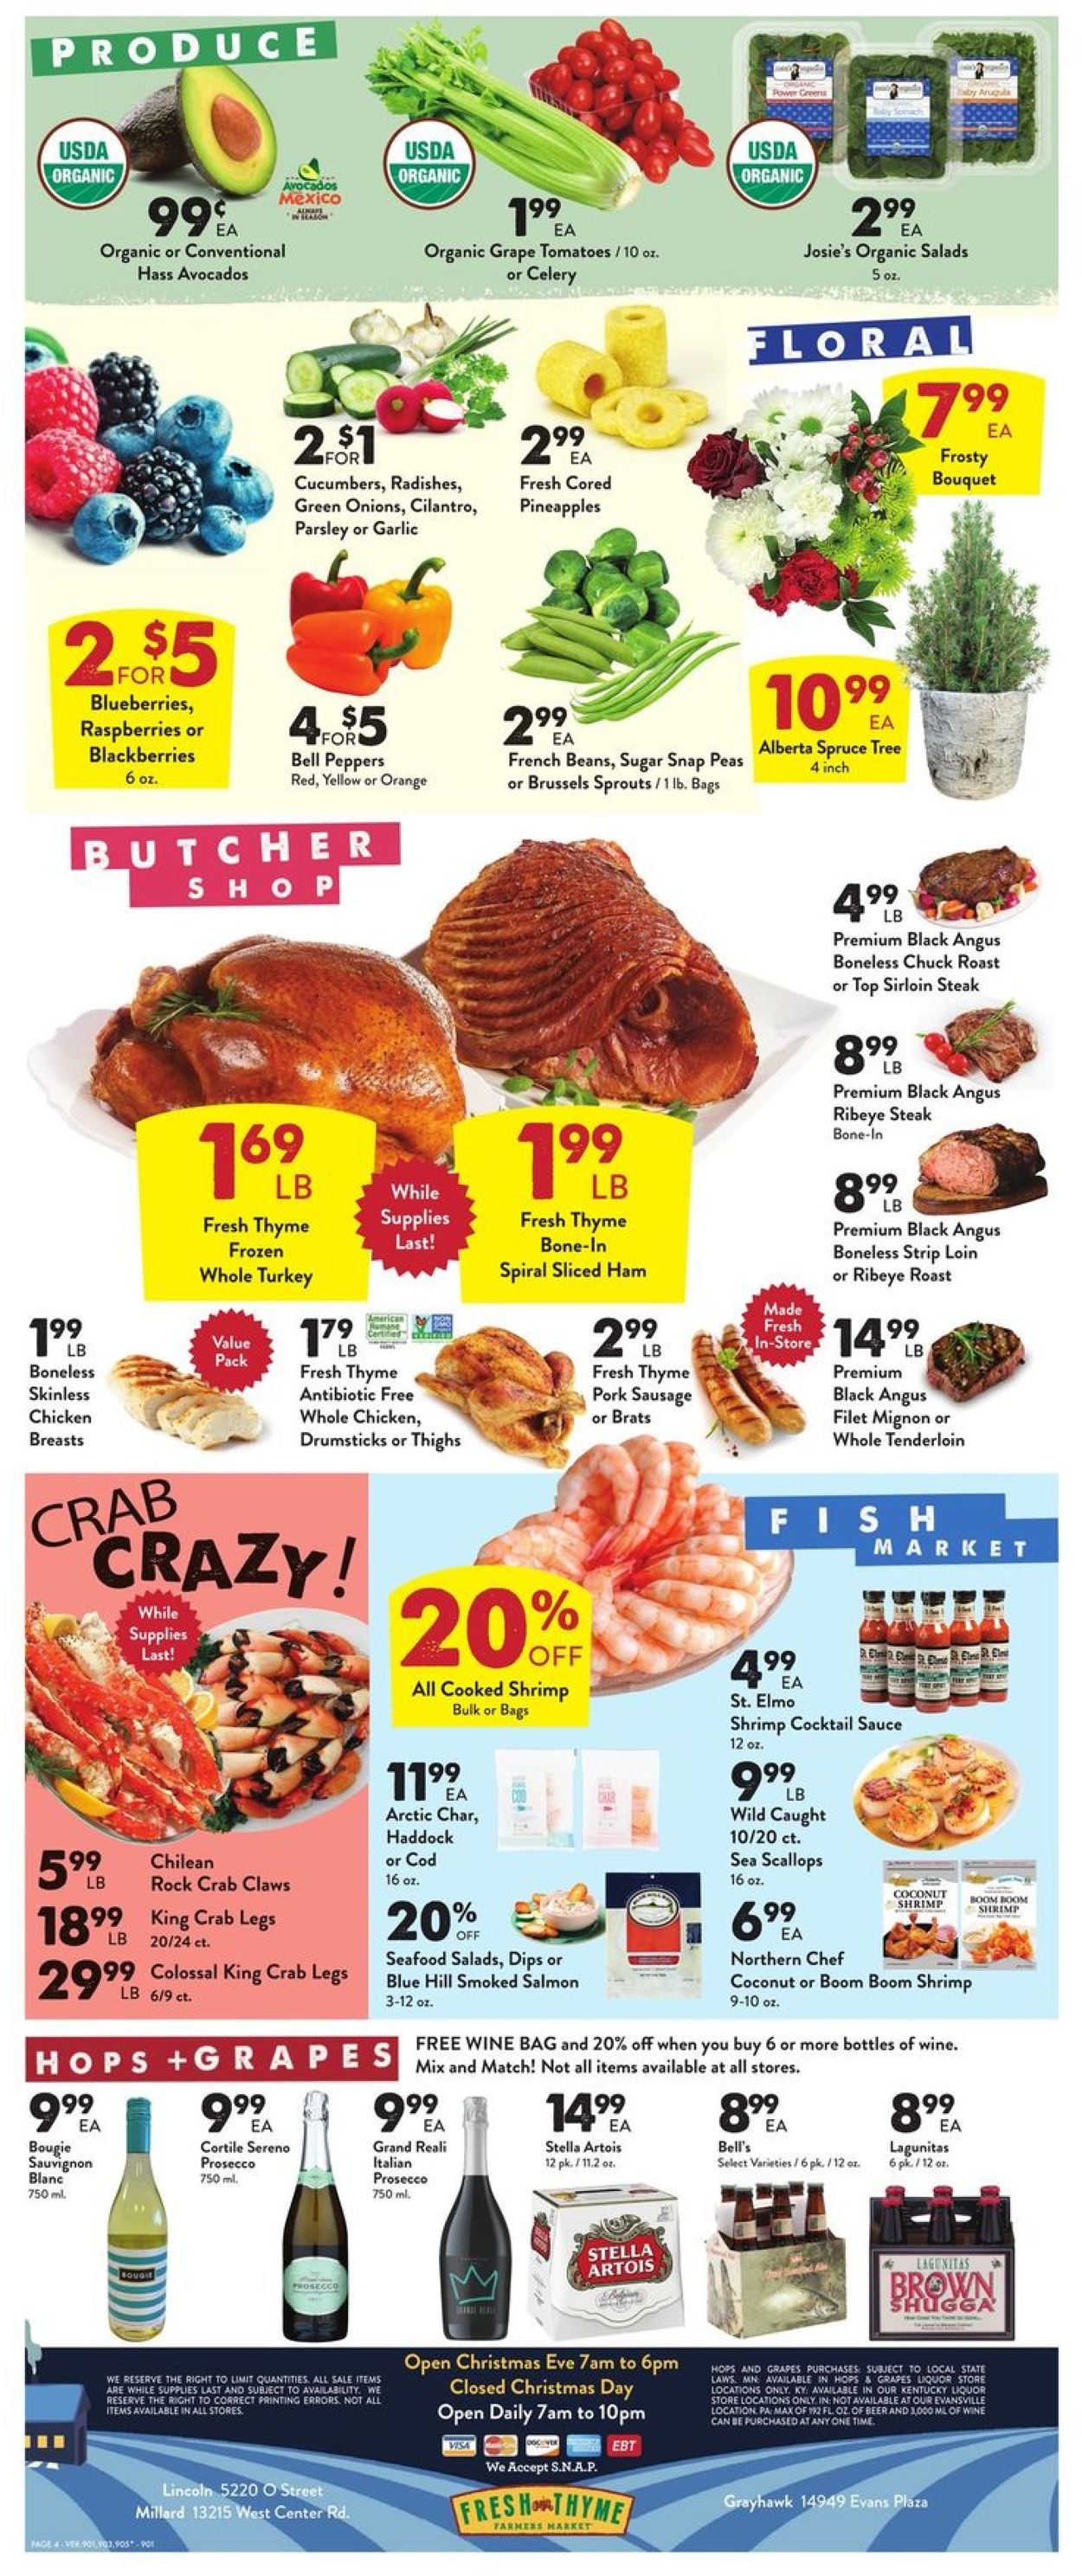 Catalogue Fresh Thyme - Holidays Ad 2019 from 12/18/2019